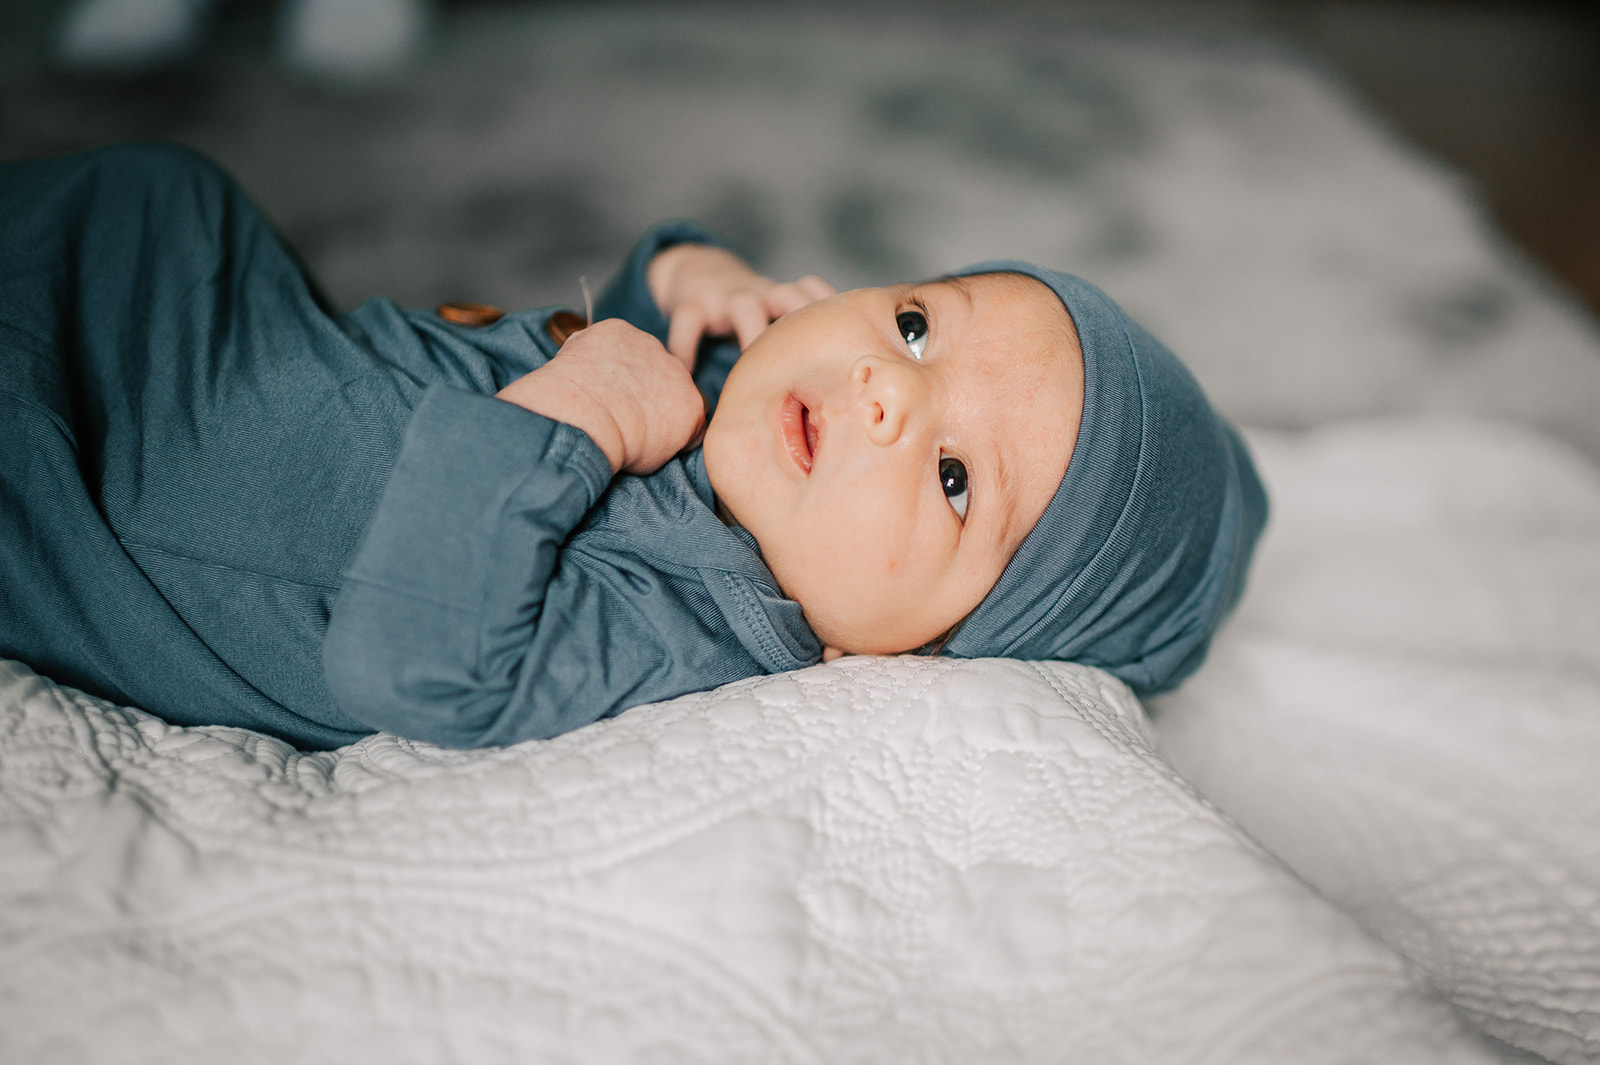 A newborn baby lays on white blanket with curious eyes looking out a window